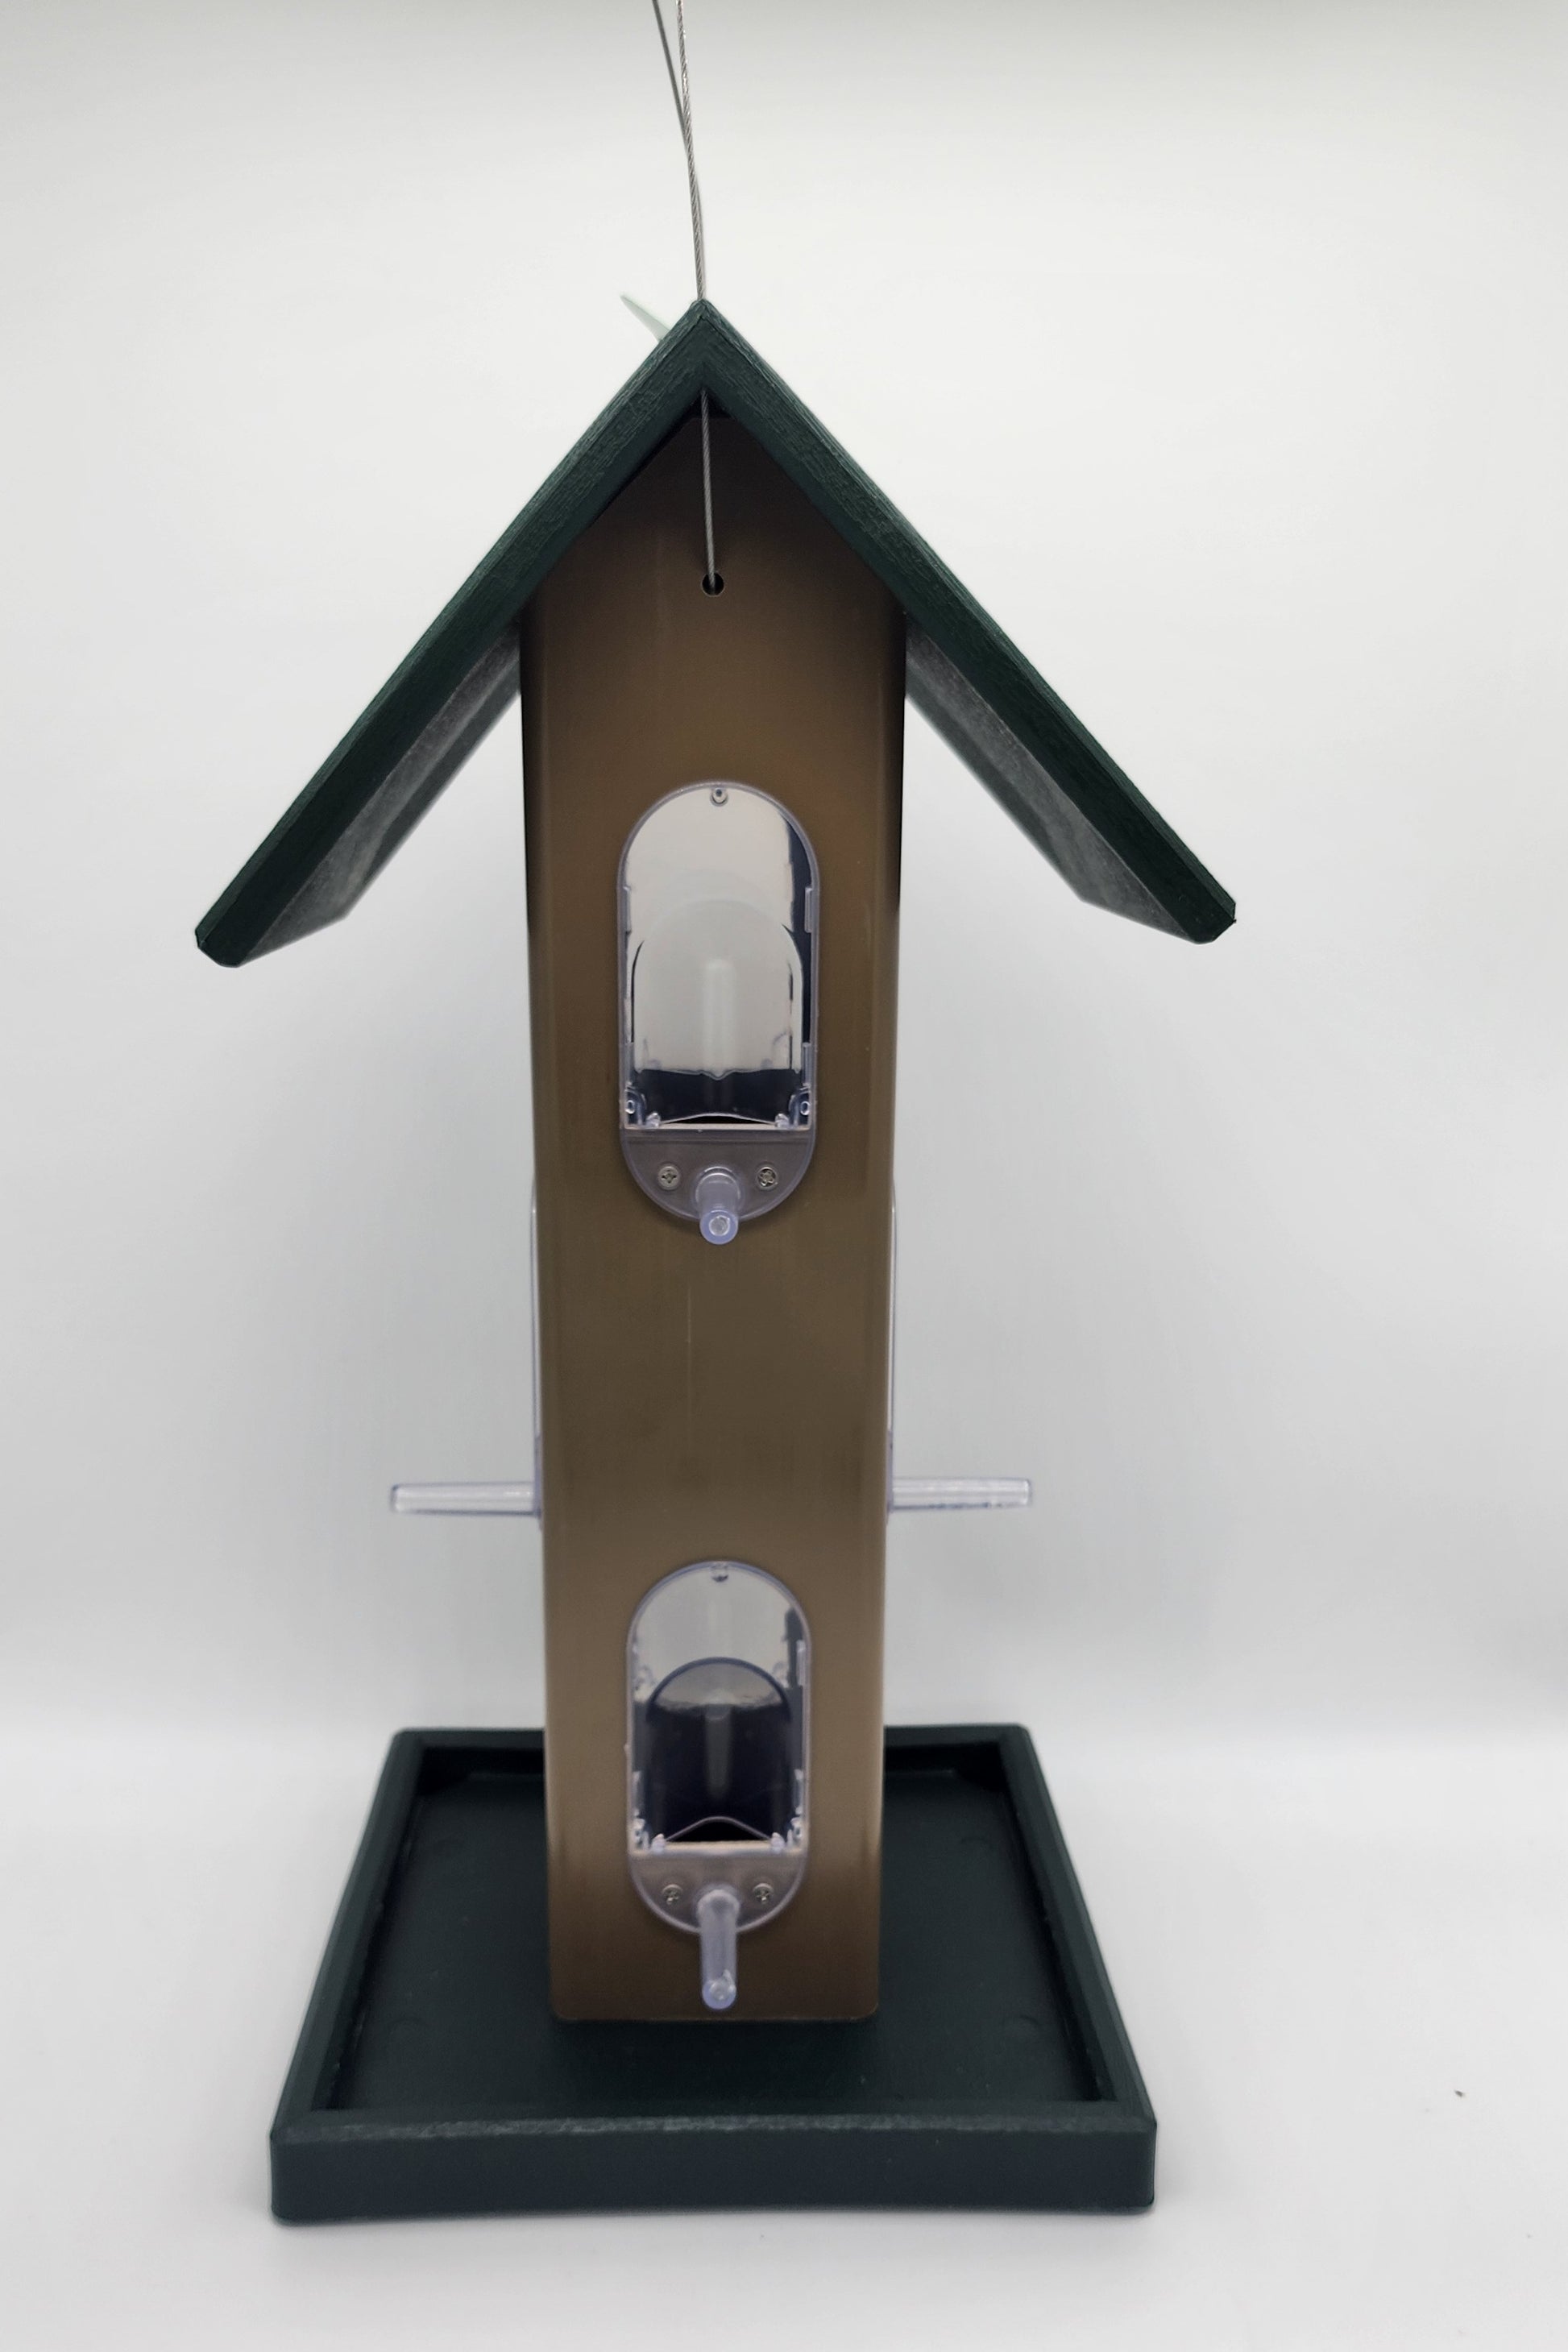 tan bird feeder with green roof and tray